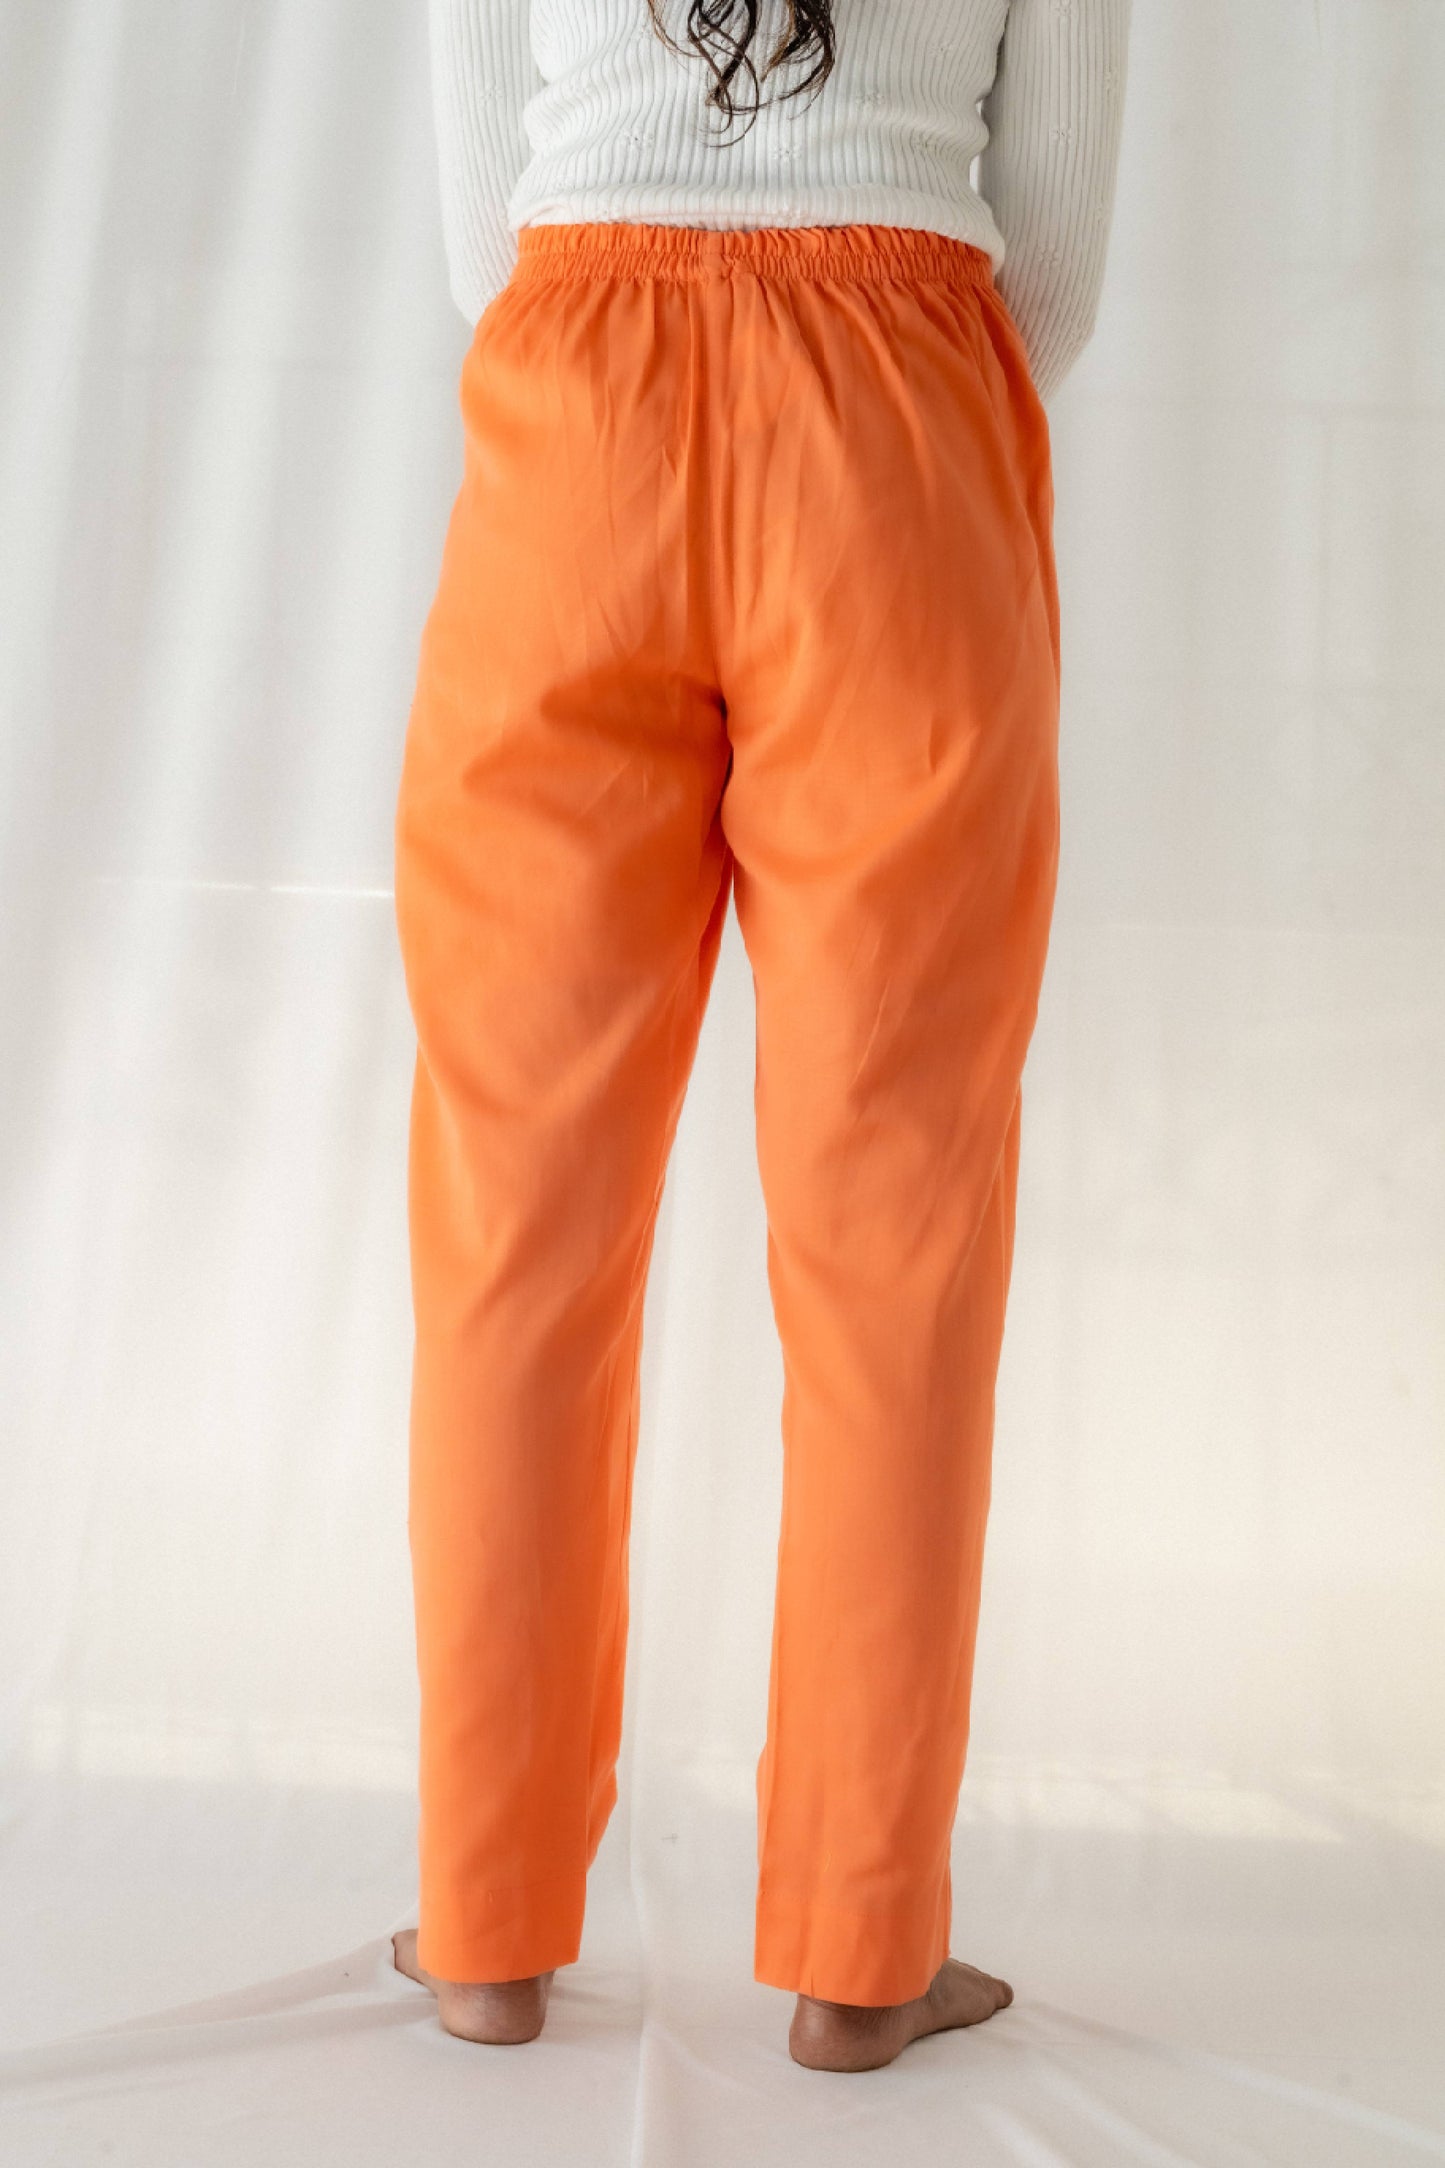 Solid Peach Cotton Pant For Women